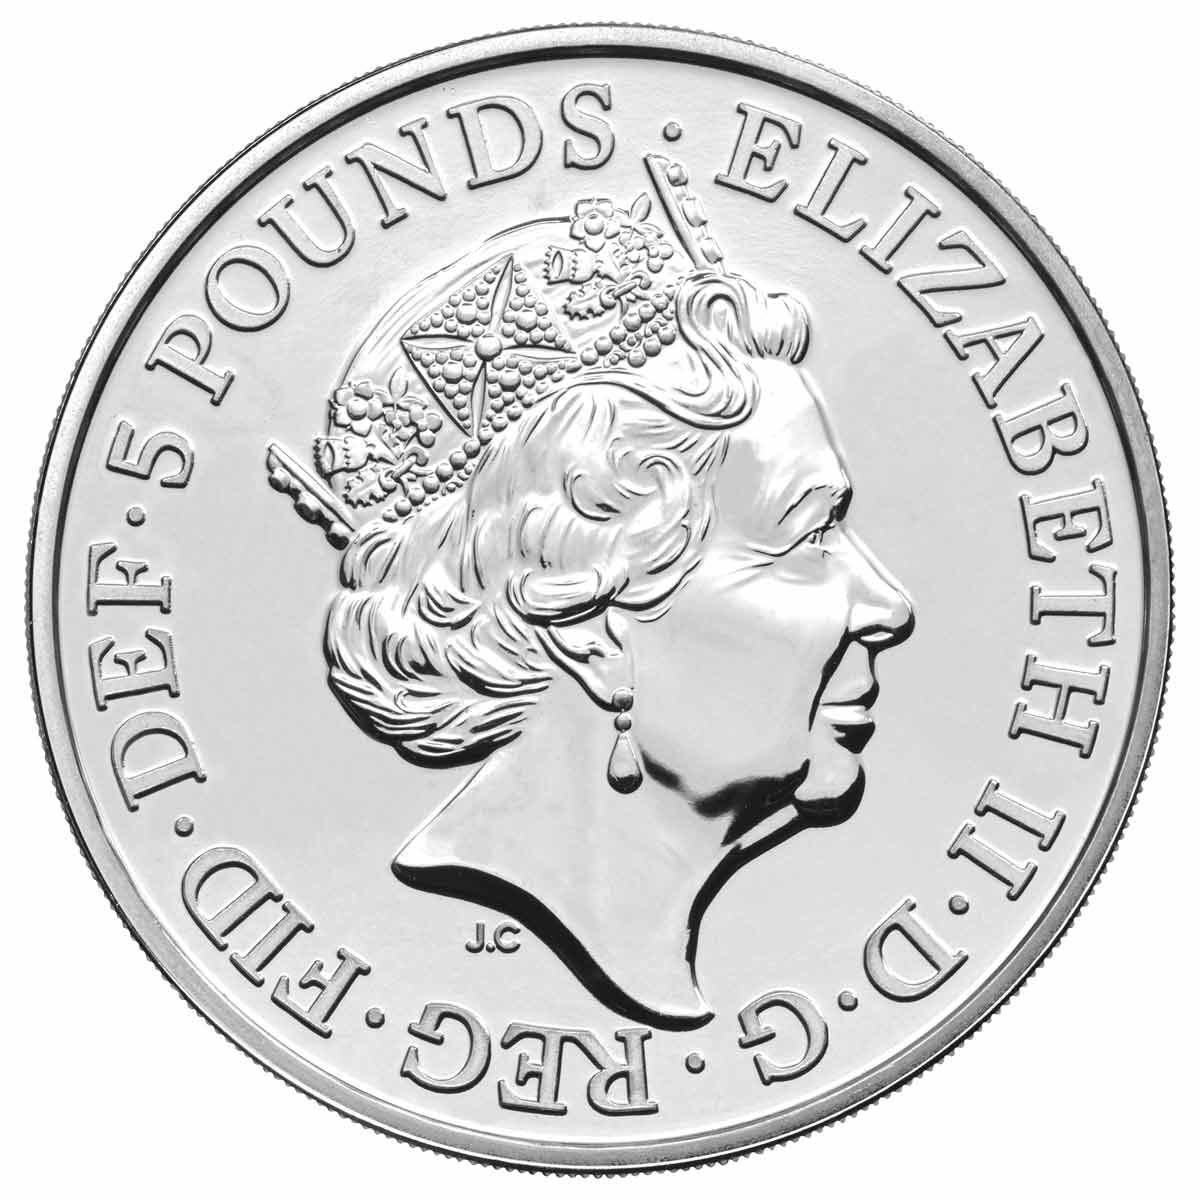 2021 £5 Queen’s Beasts White Greyhound of Richmond Brilliant Uncirculated Coin